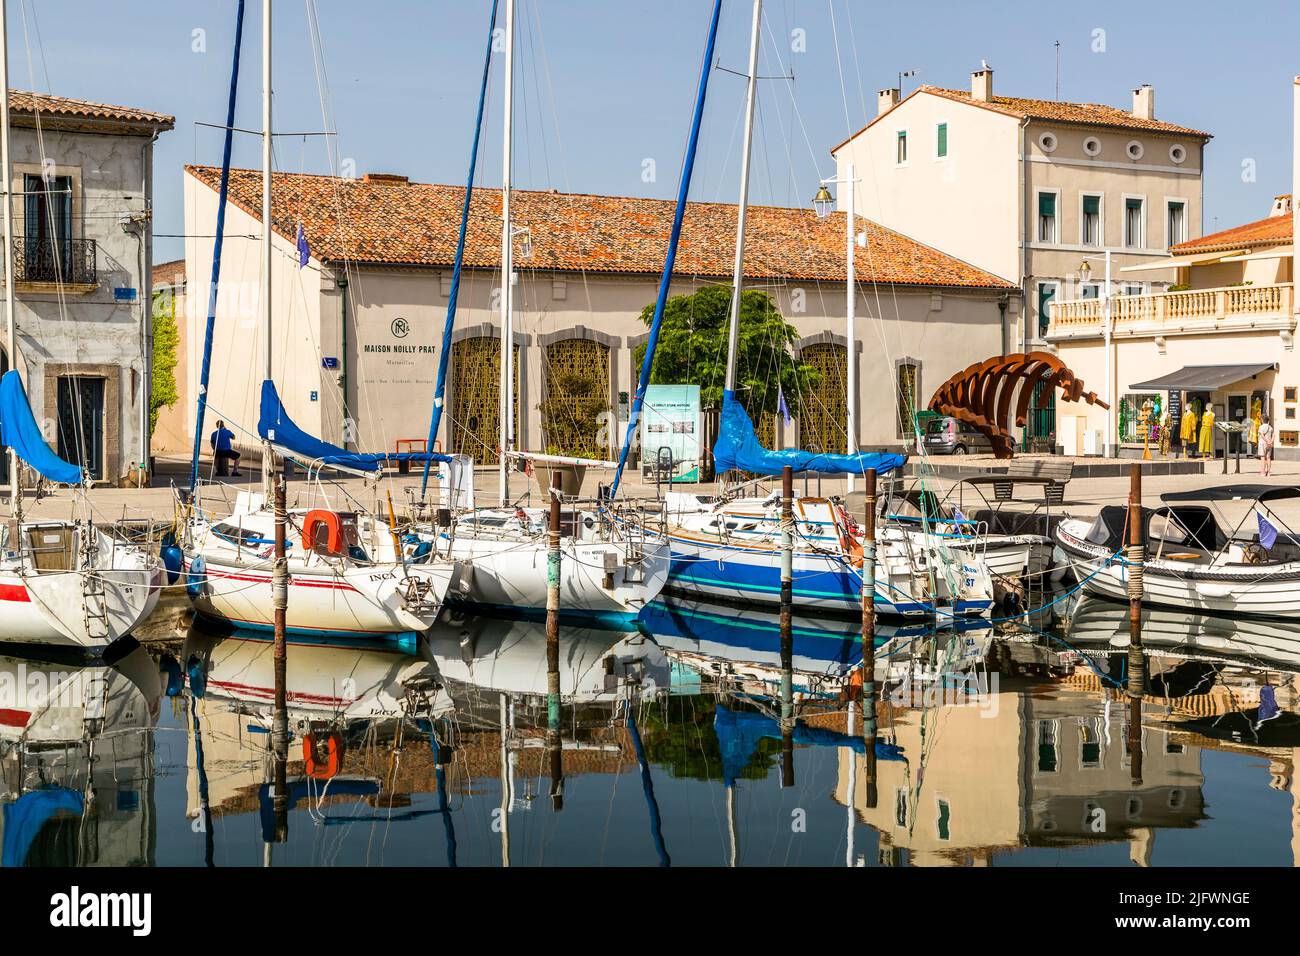 The parent company of Noilly Prat in Marseillan (France) in the Languedoc. Directly on the tranquil harbor of the small town about 50 km from Montpellier, vermouth has been produced since 1859 to this day Stock Photo